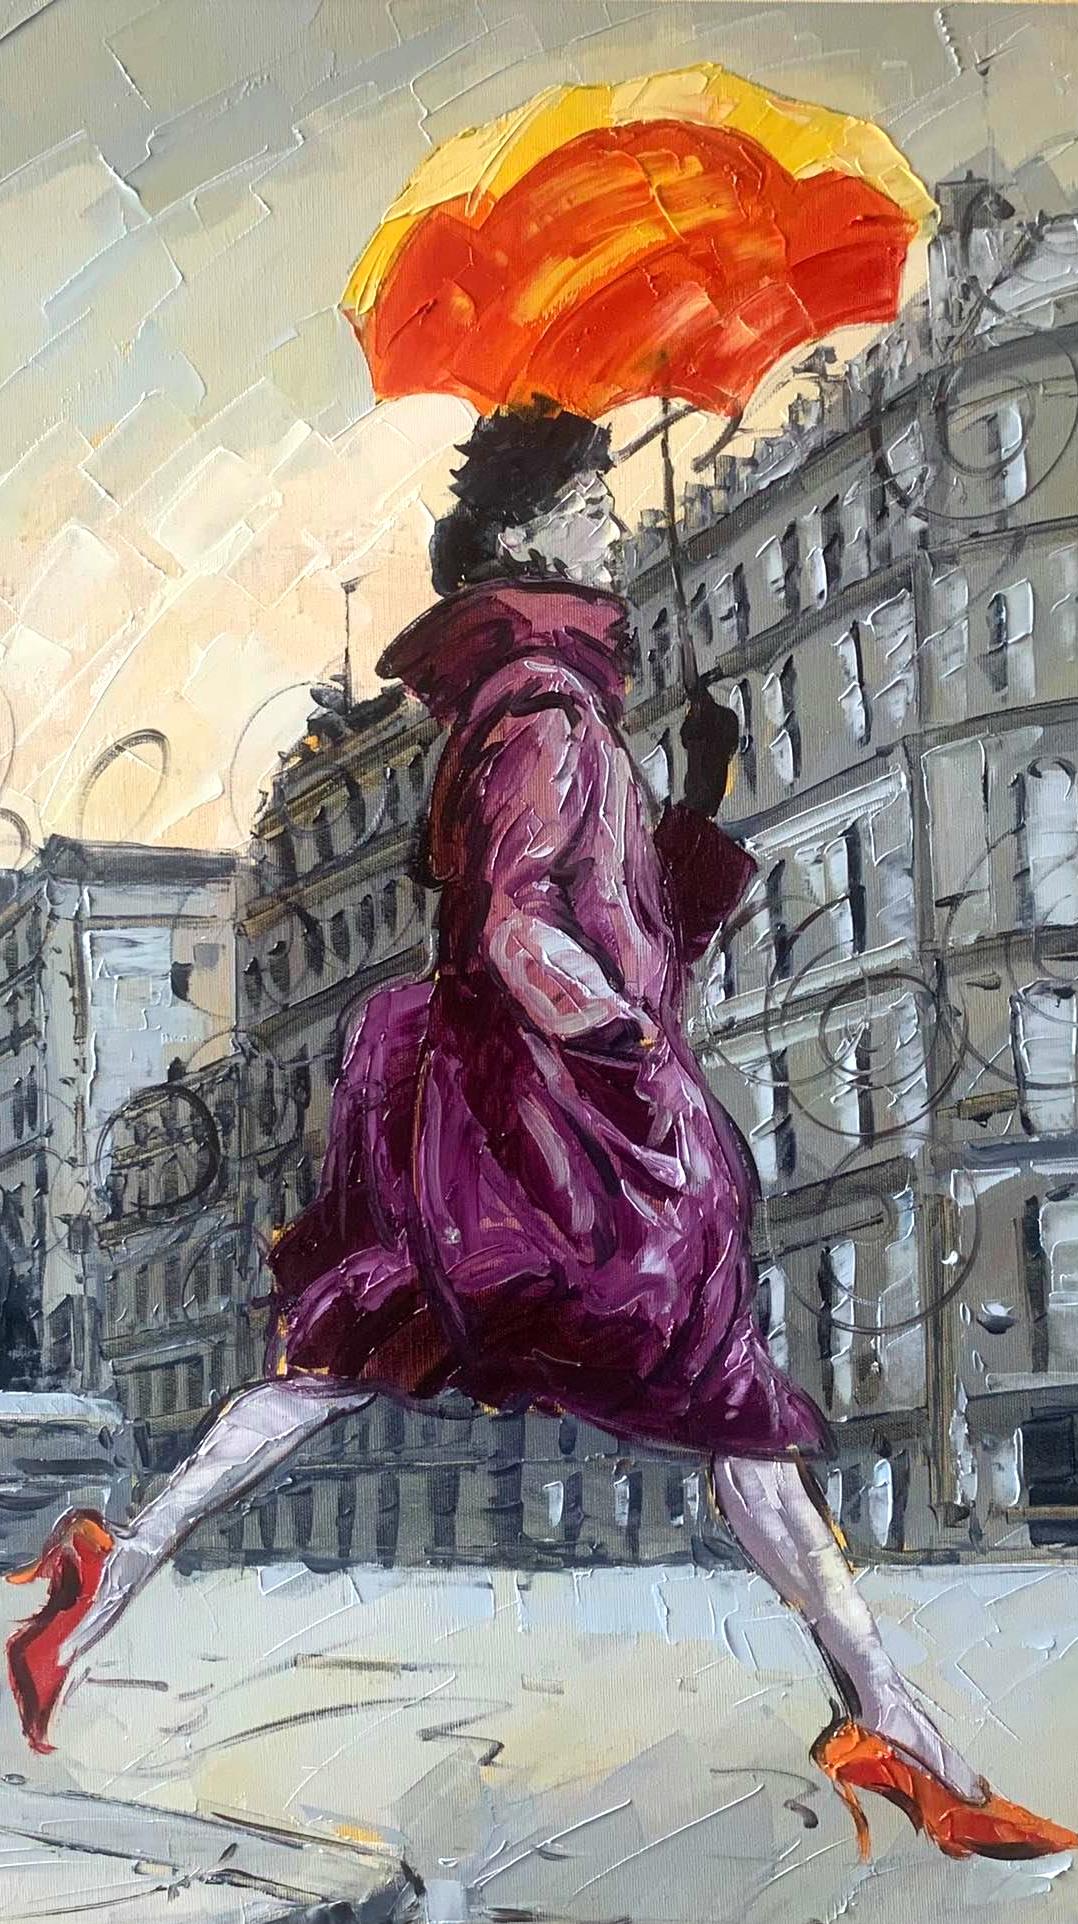 Coco in Paris is a series of four paintings. This is Coco III..They can be sold as a set $8800 or individually  $2200. The Coco series is by a young Cuban artist now living in Barcelona. Coco series was painted plein air  just recently on a trip to